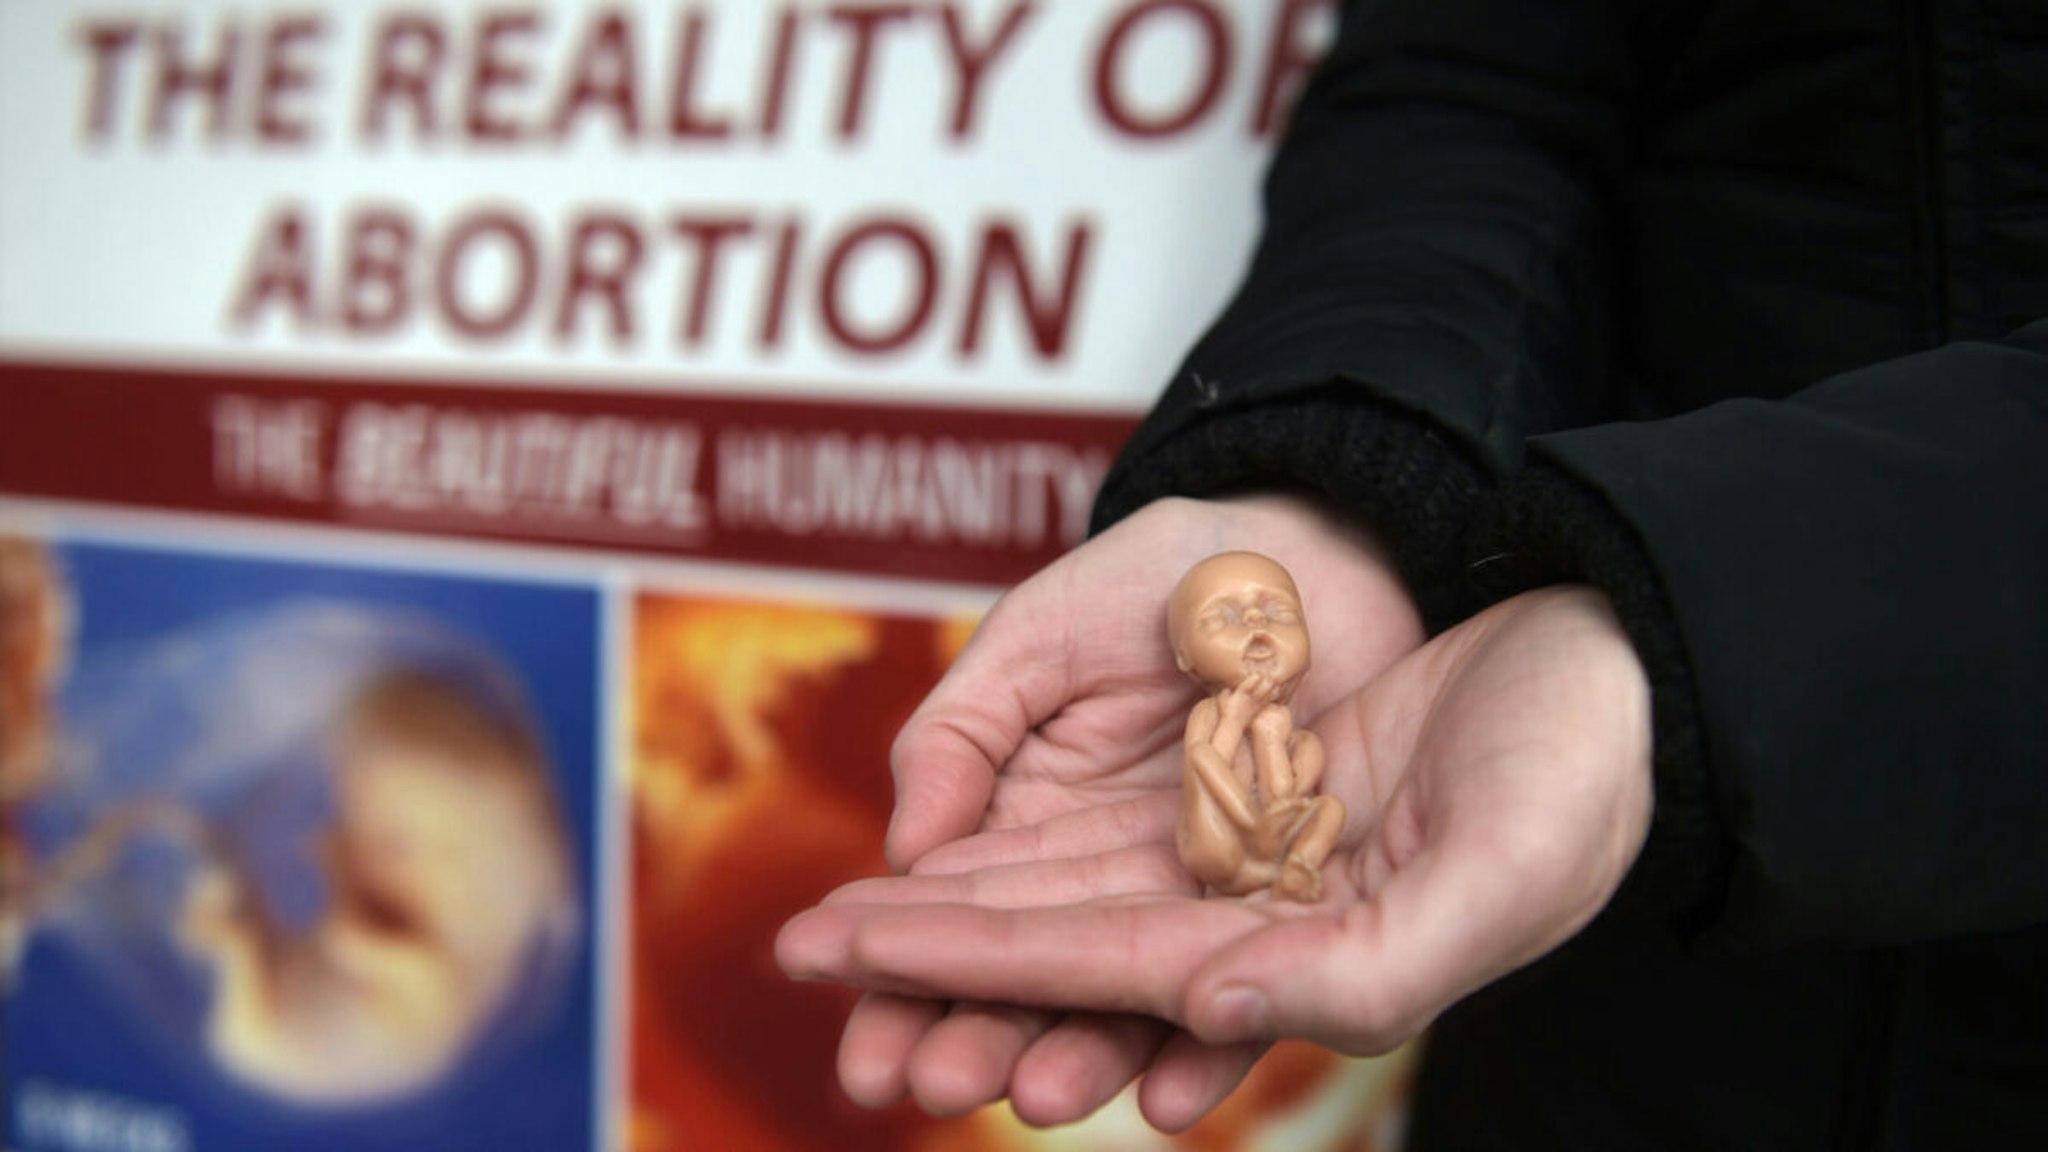 A Pro Life campaigner displays a plastic doll representing a 12 week old foetus as she stands outside the Marie Stopes Clinic on April 7, 2016 in Belfast, Northern Ireland.